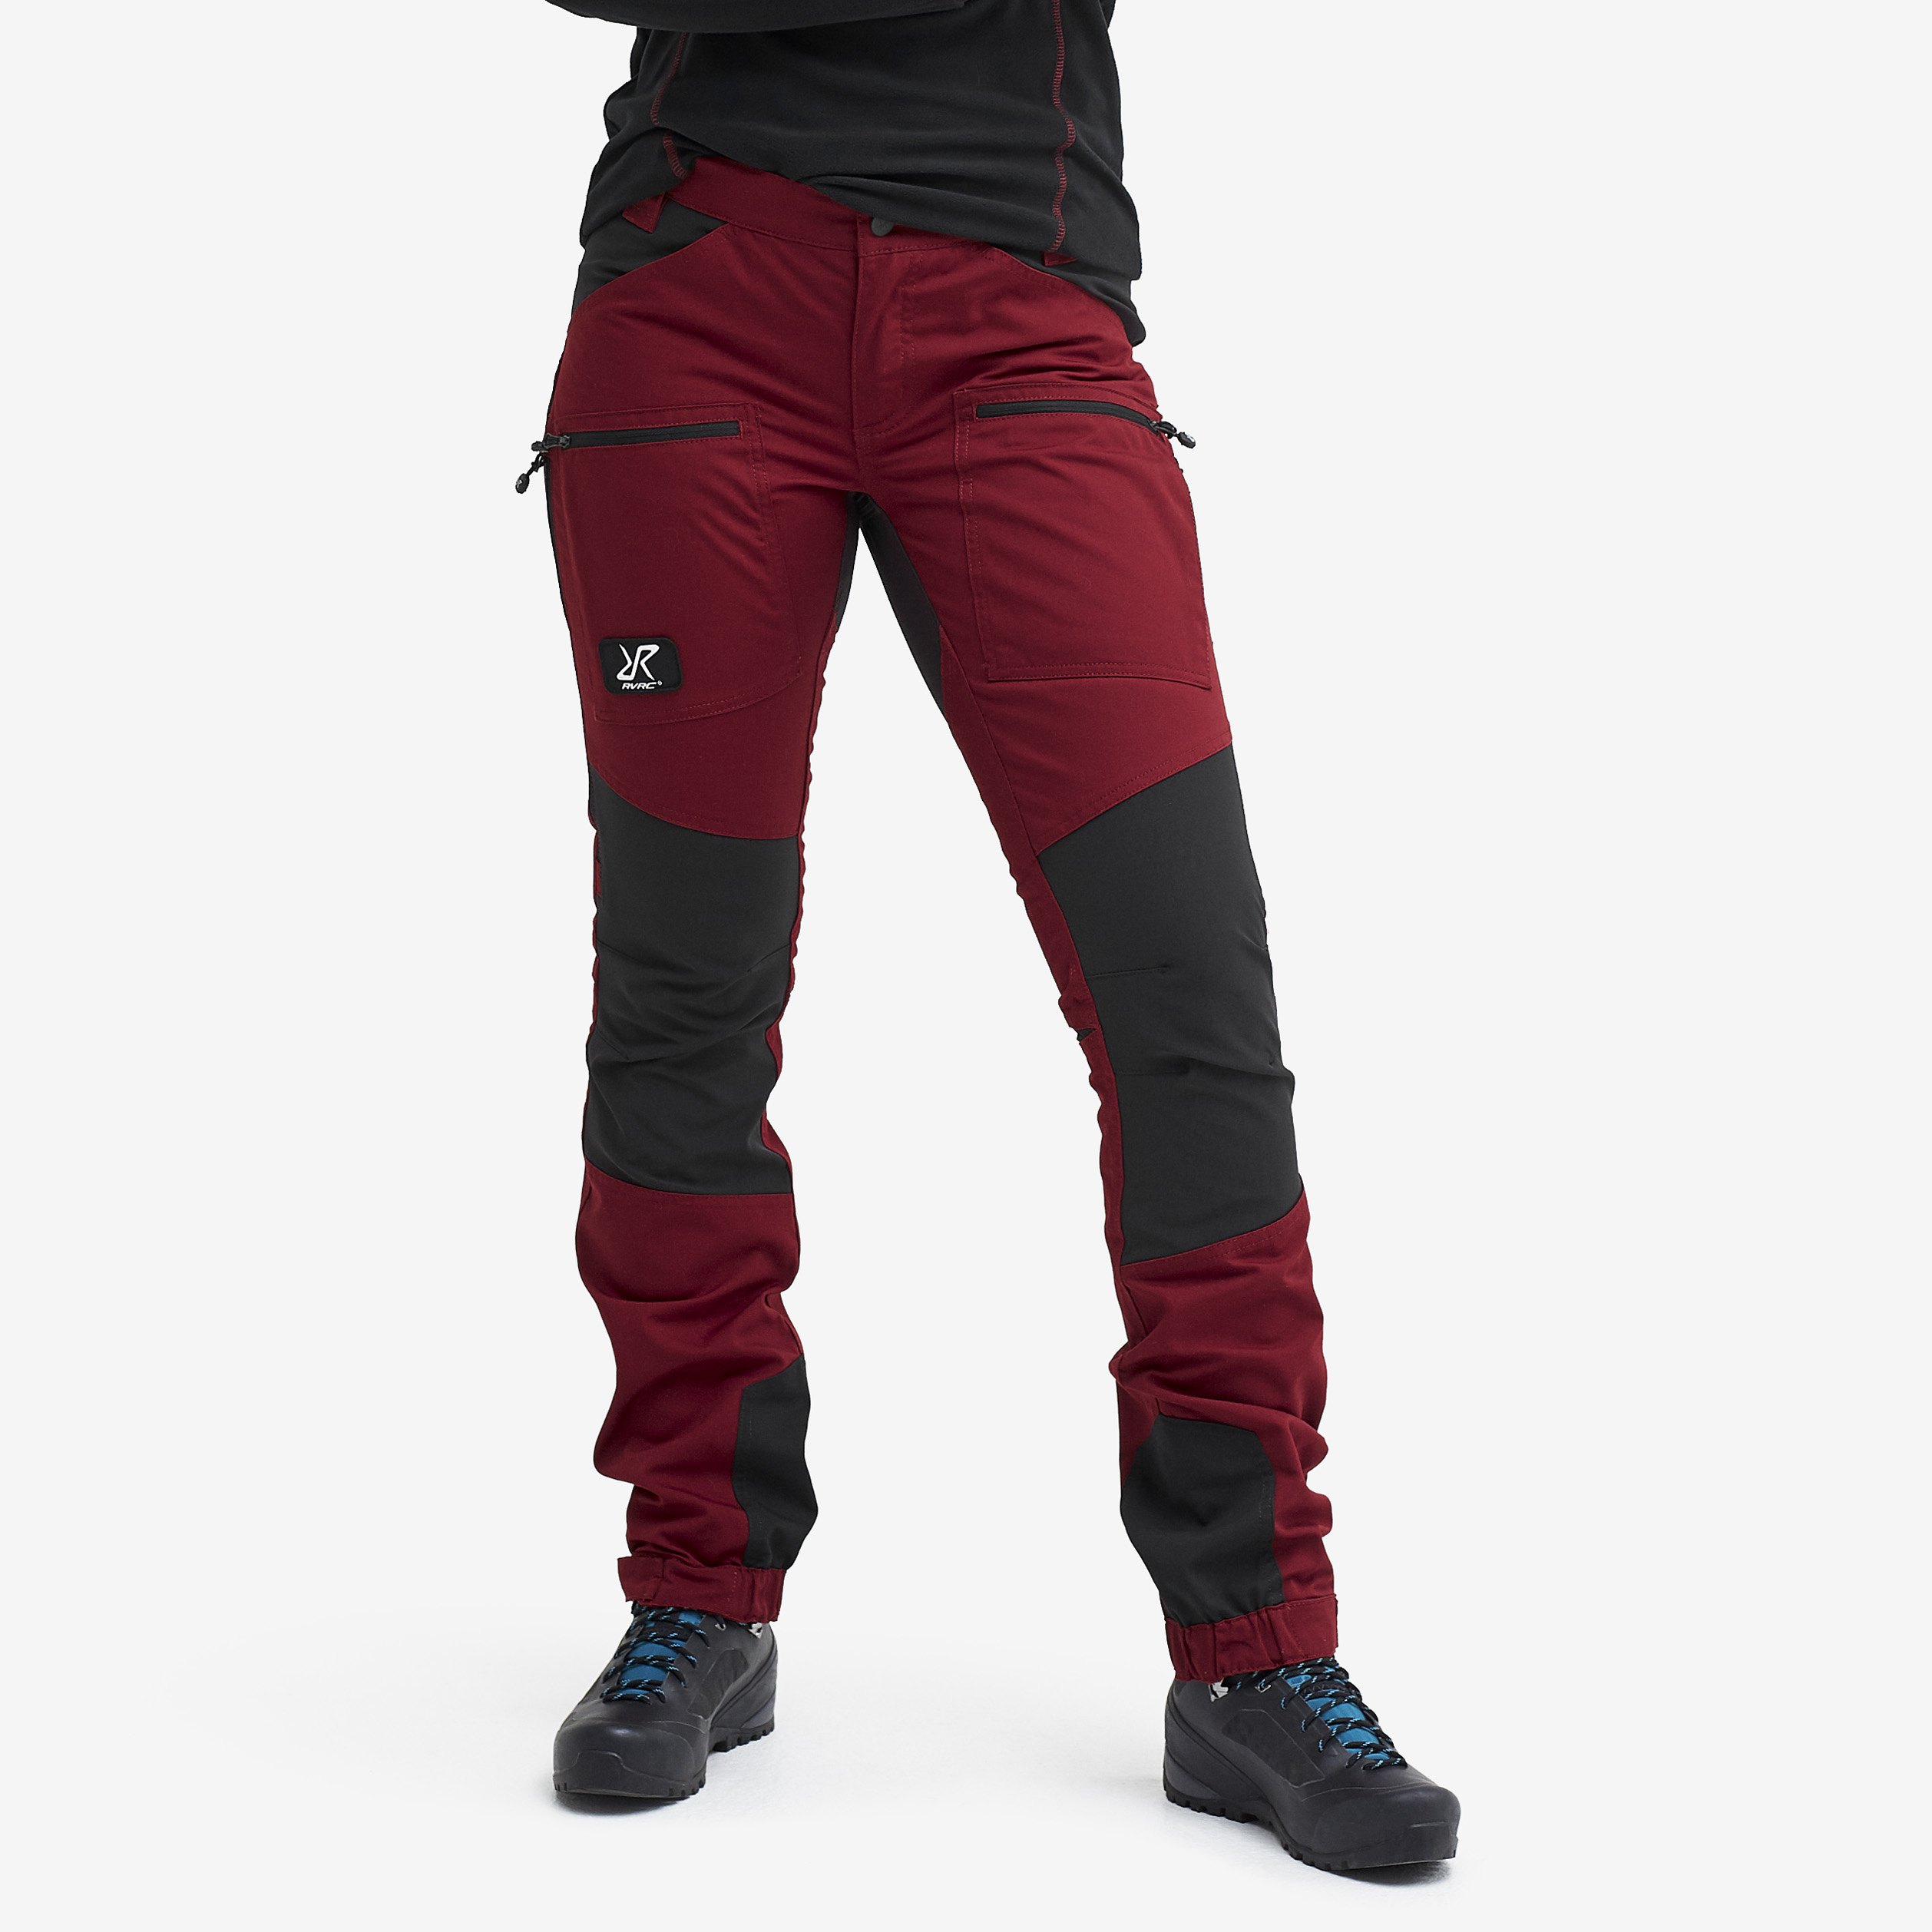 Nordwand Pro Trousers Wine Red Women